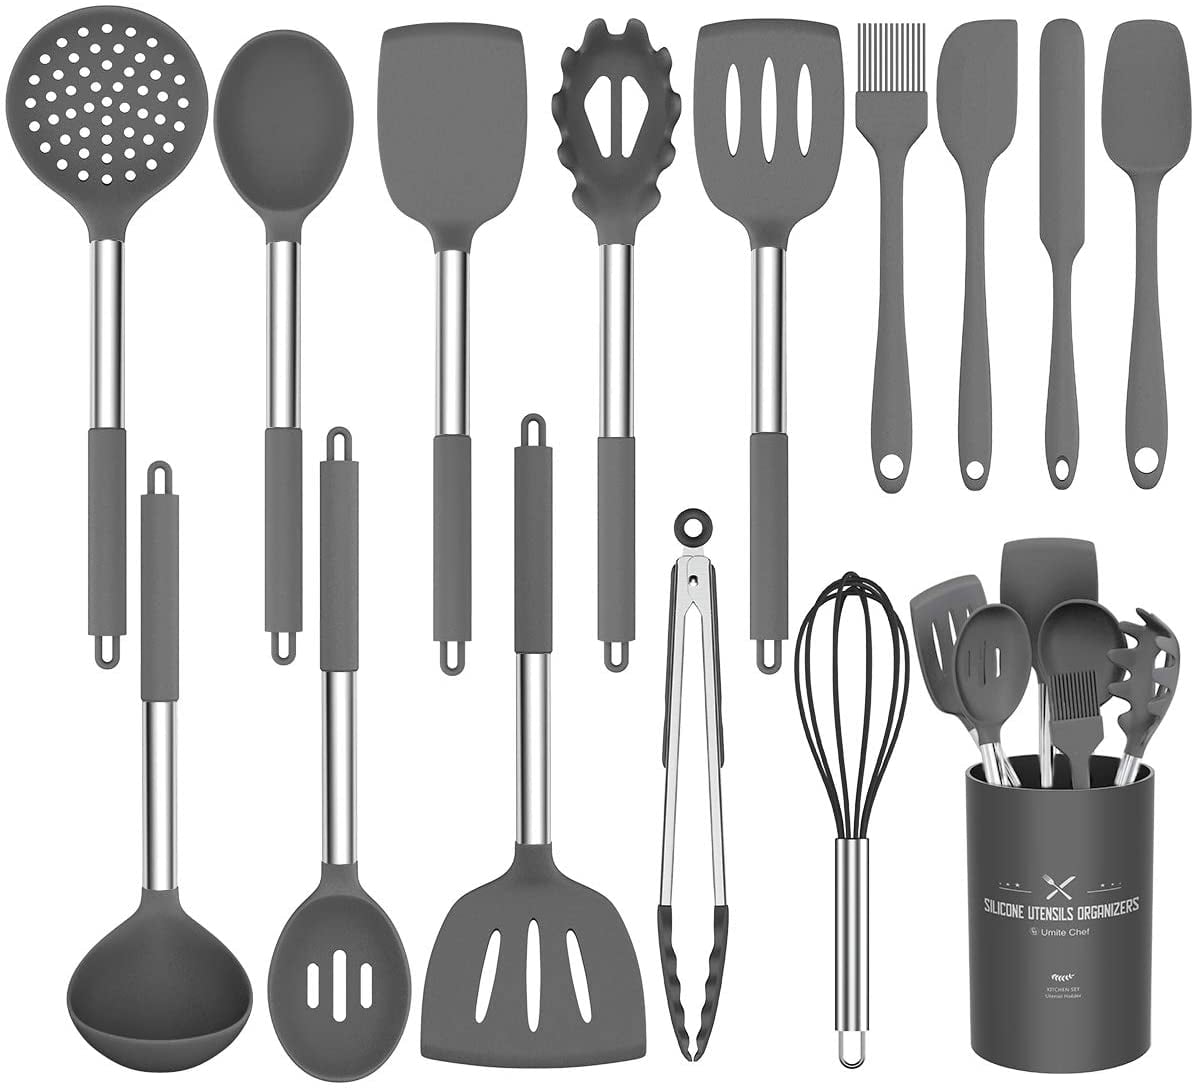 Kitchen Gadget Tools with Wooden Handle Pizza Cutter Black 34pcs Silicone Cooking Kitchen Utensil Set Turner,Tongs Umite Chef Heat Resistant Kitchen Utensils Spatula Set for Nonstick Cookware 